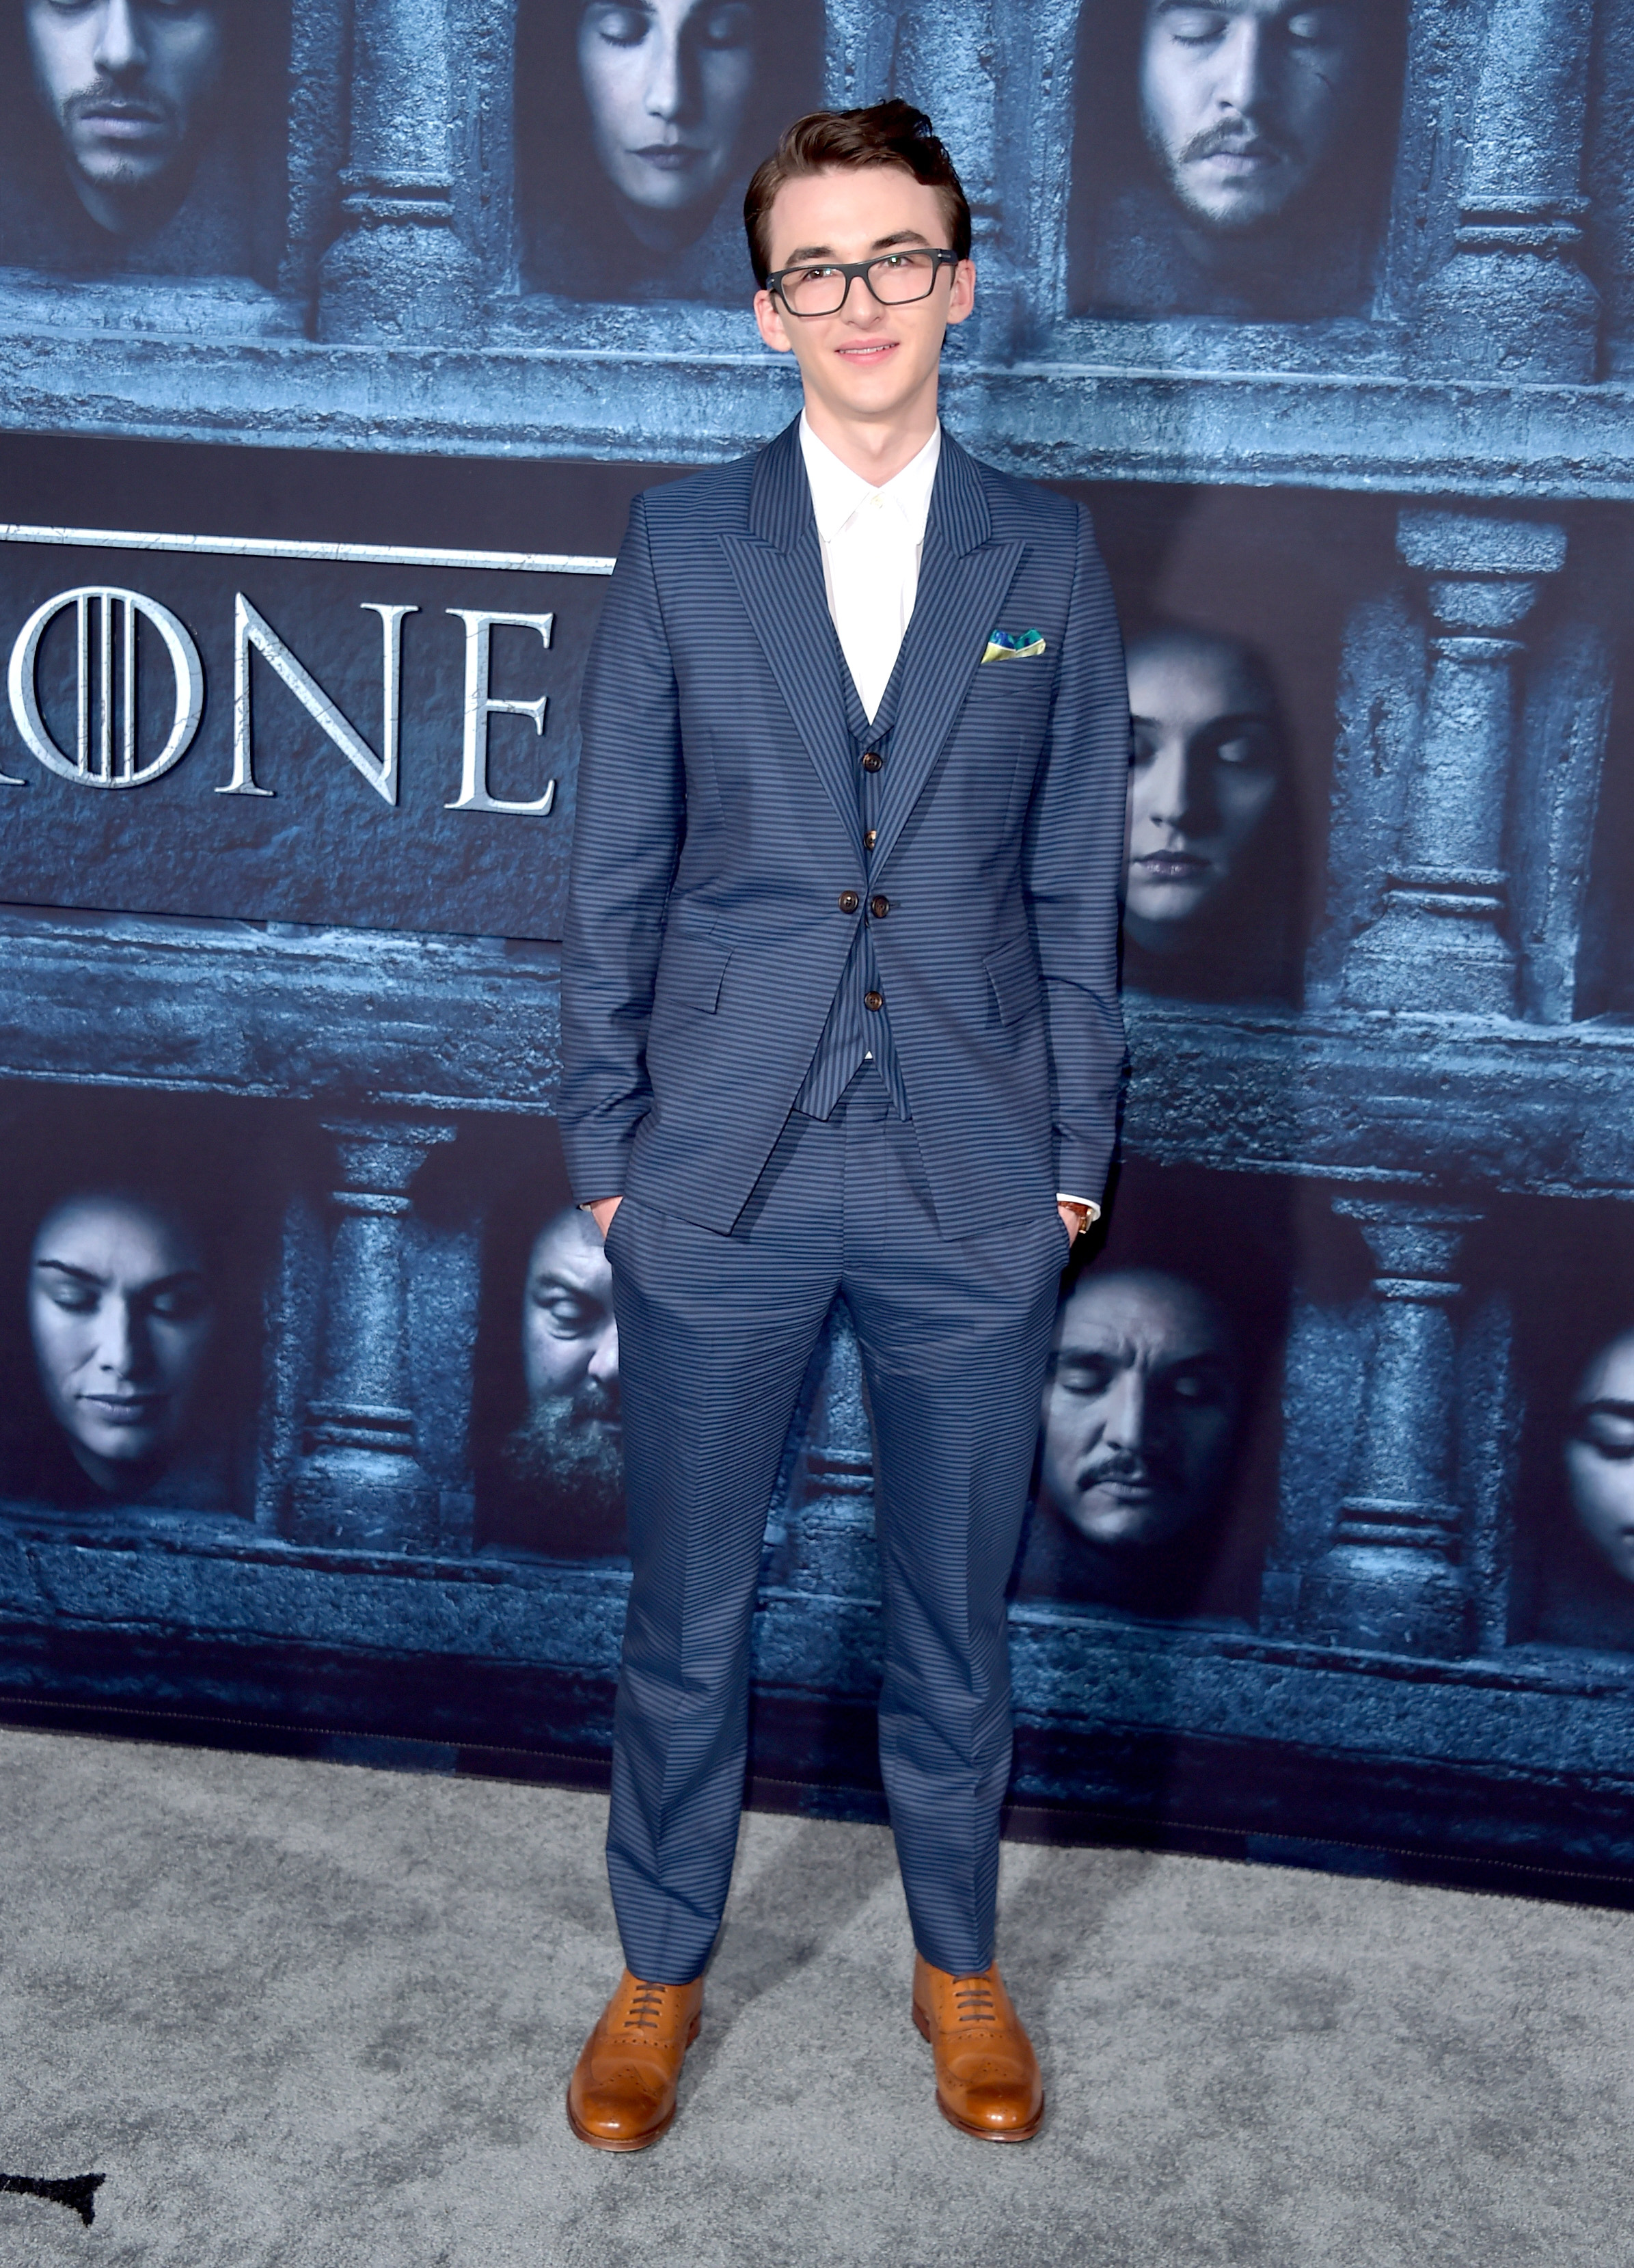 HOLLYWOOD, CALIFORNIA - APRIL 10:  Actor Isaac Hempstead Wright attends the premiere of HBO's "Game Of Thrones" Season 6 at TCL Chinese Theatre on April 10, 2016 in Hollywood, California.  (Photo by Alberto E. Rodriguez/Getty Images)